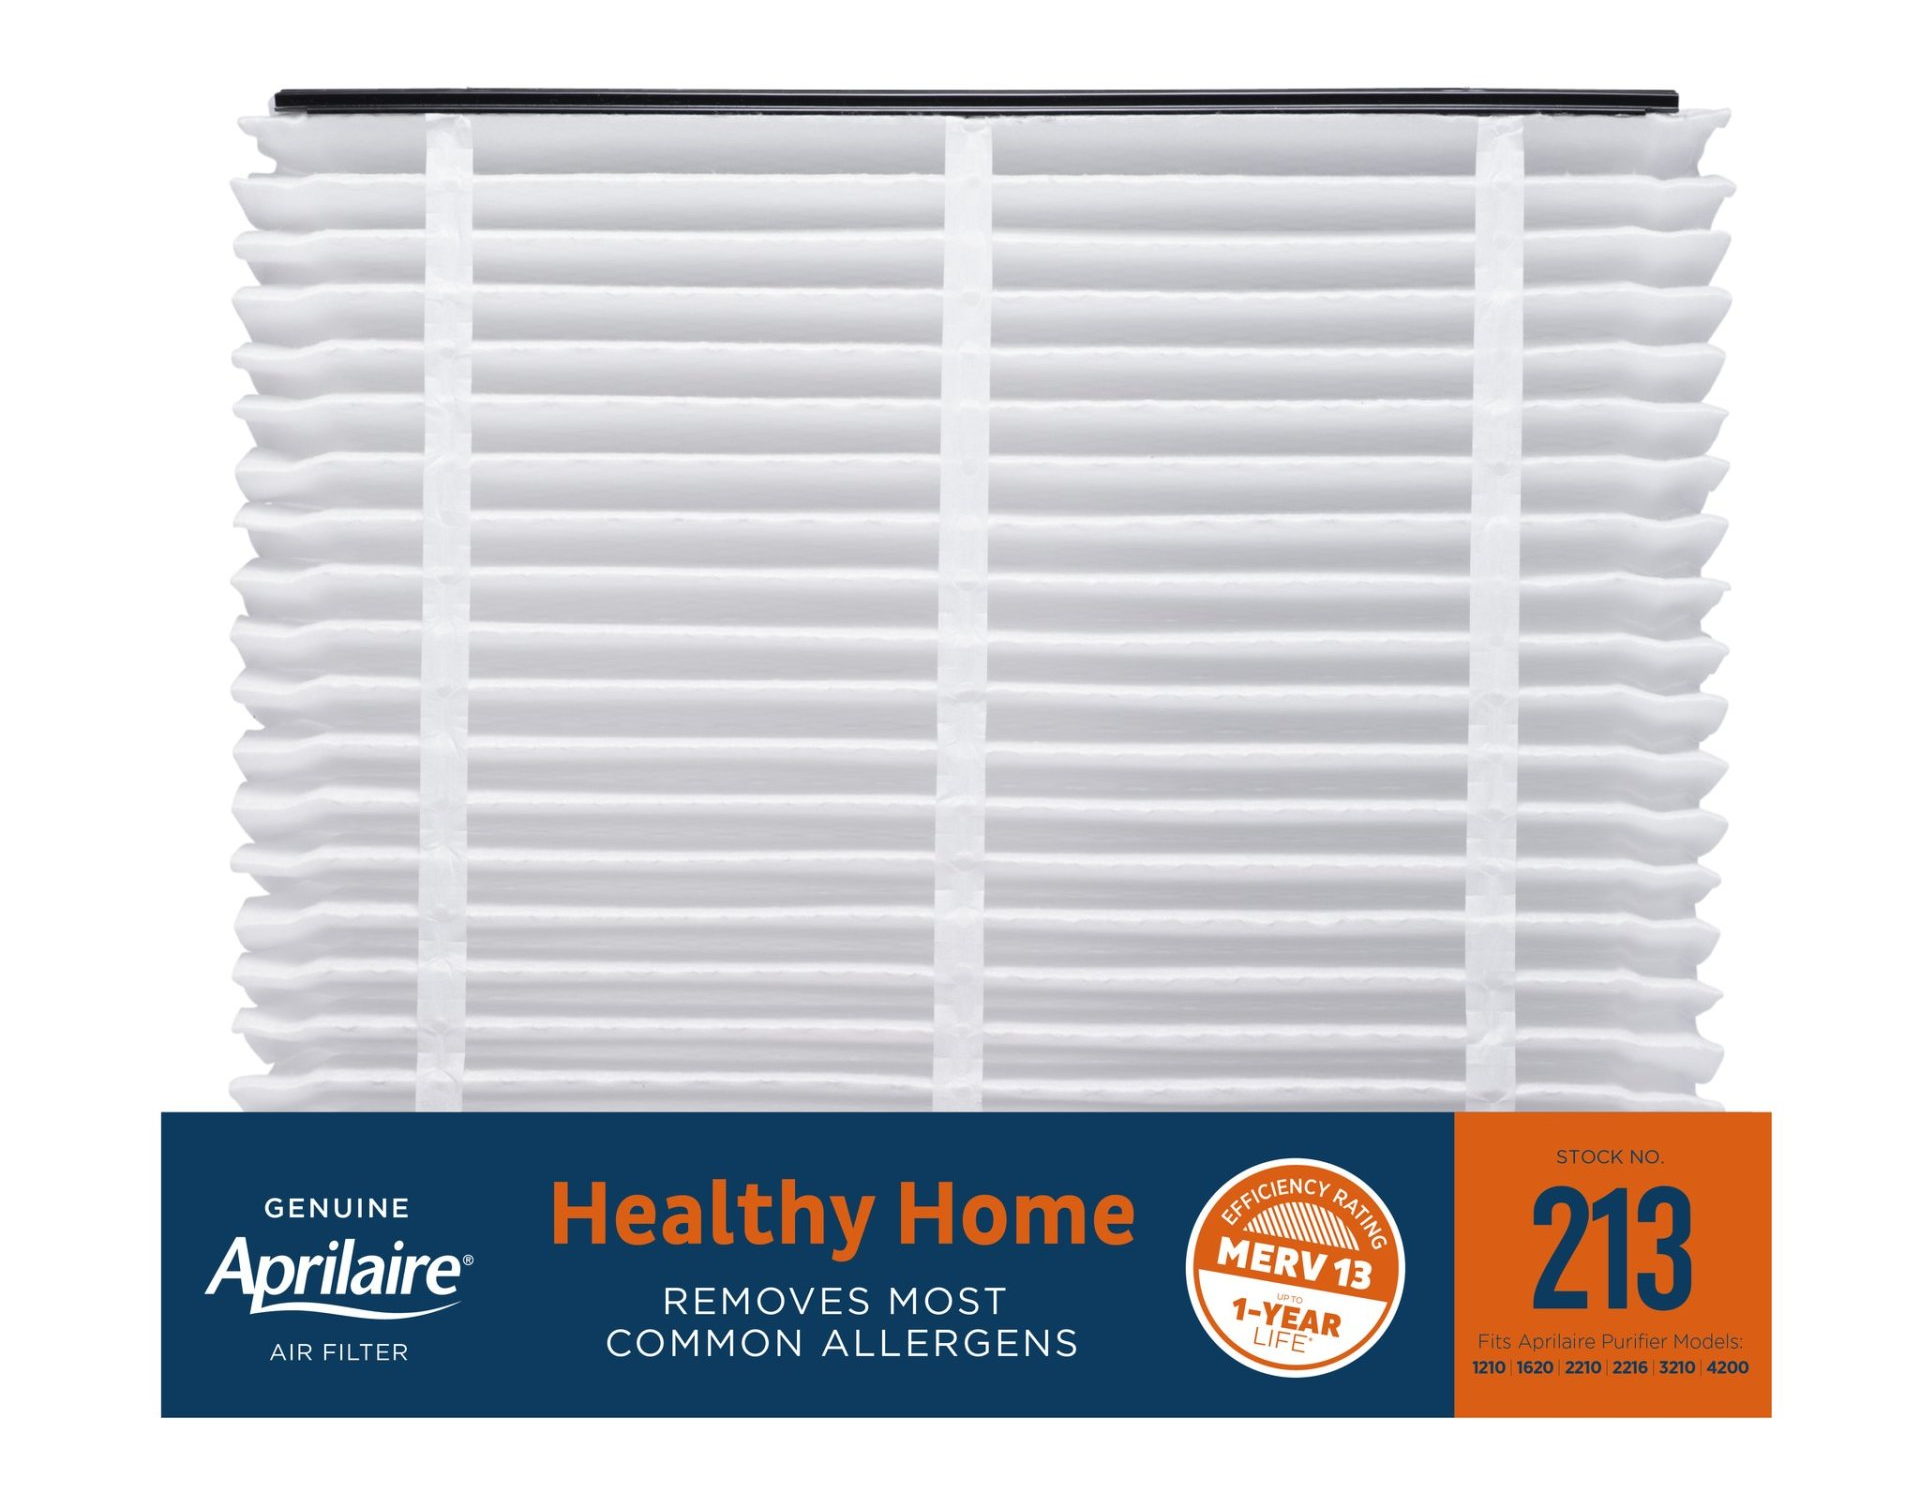 It is a healthy home air filter that removes most common allergies.